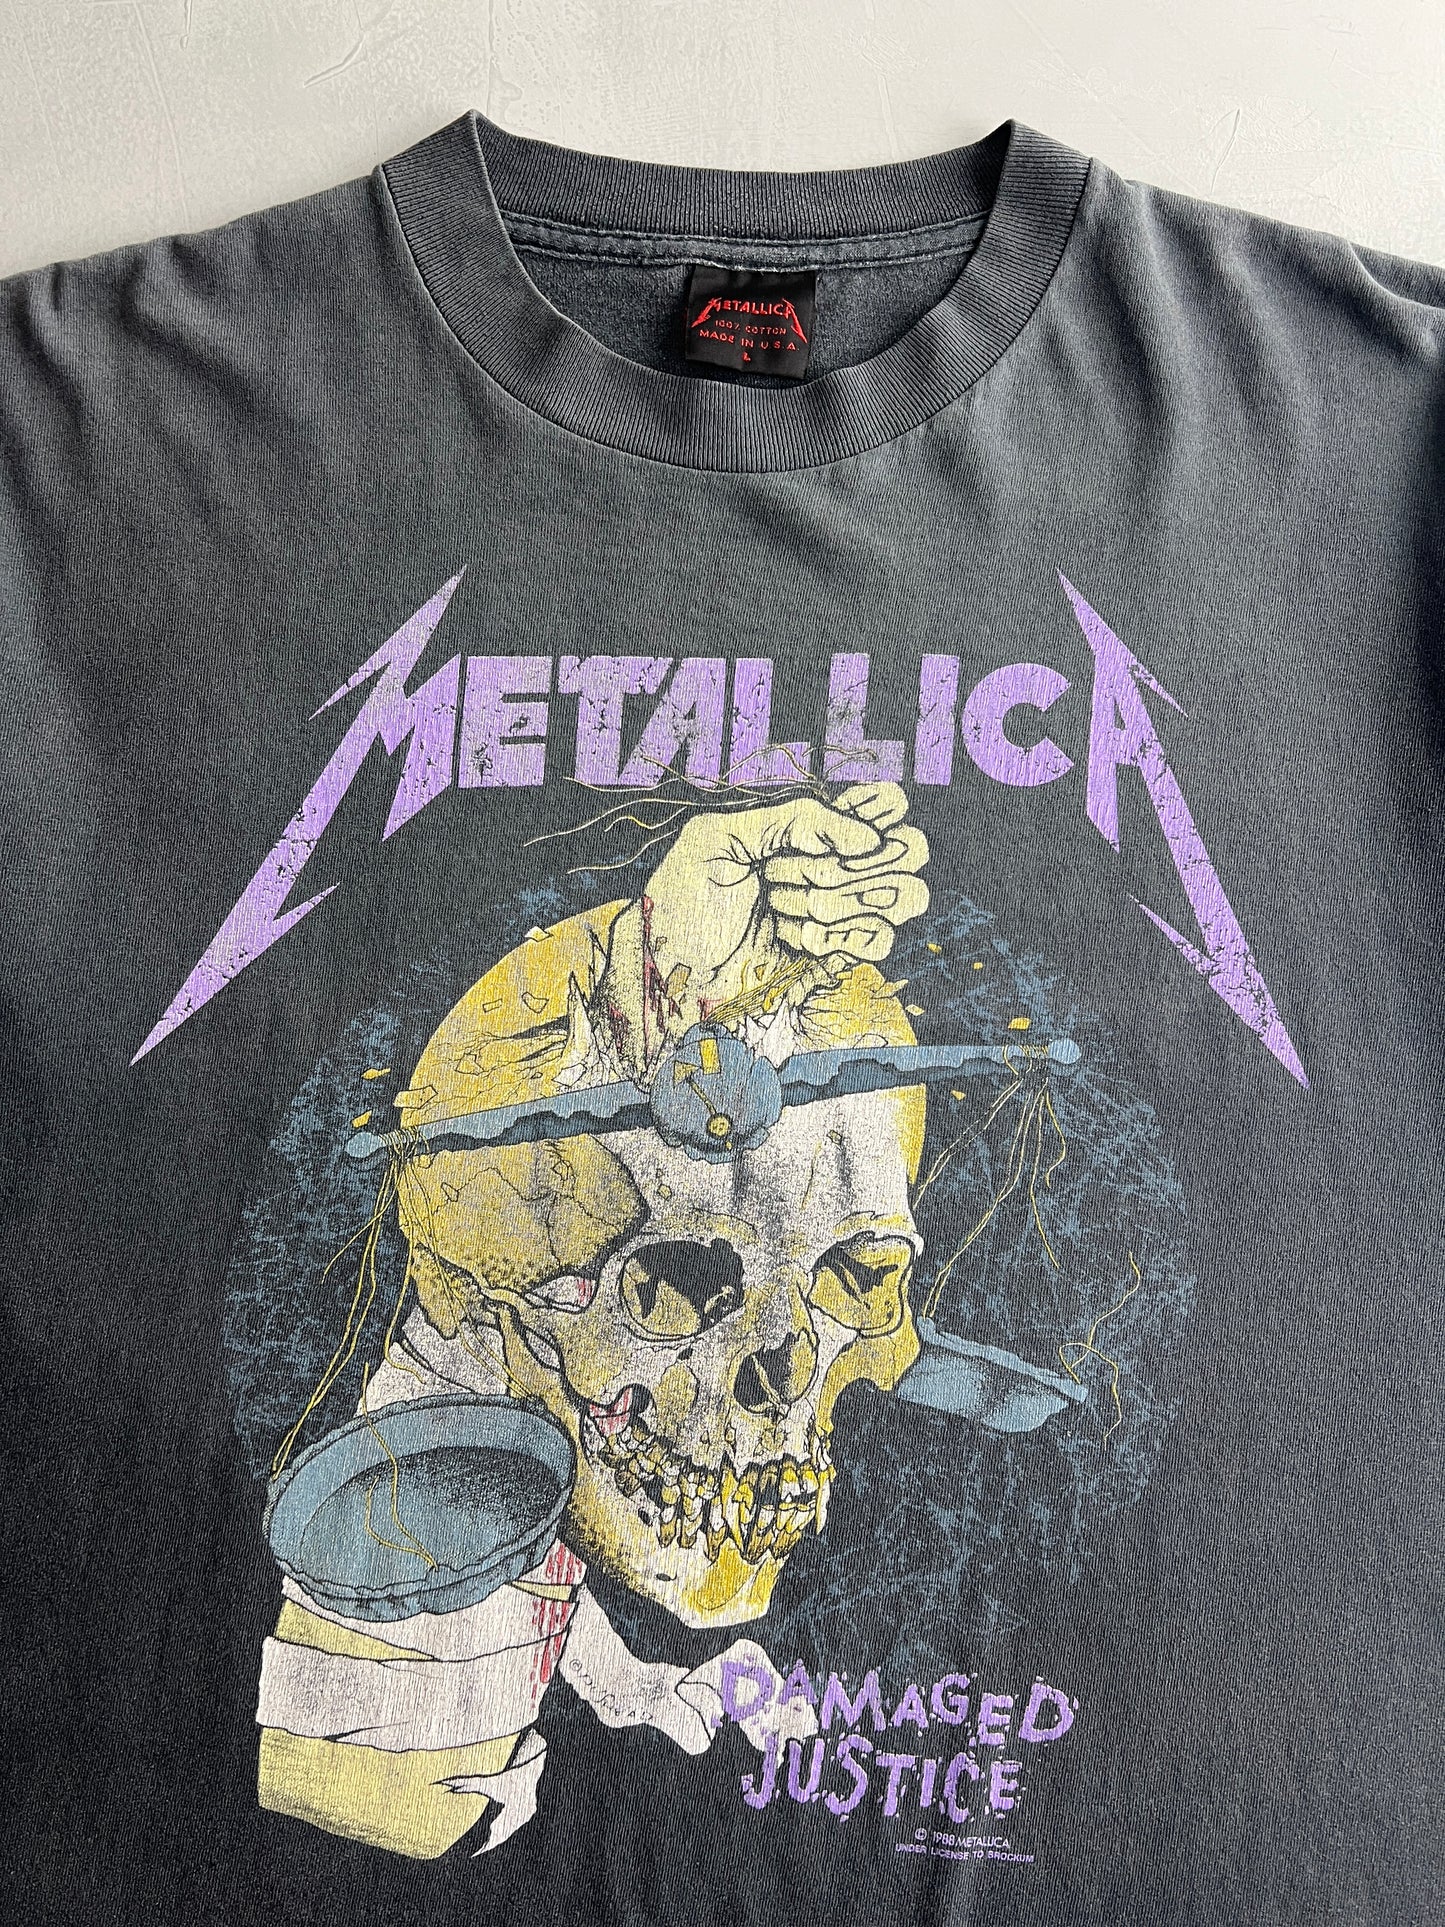 '88 Metallica 'And Justice For All' Tour Tee [L]